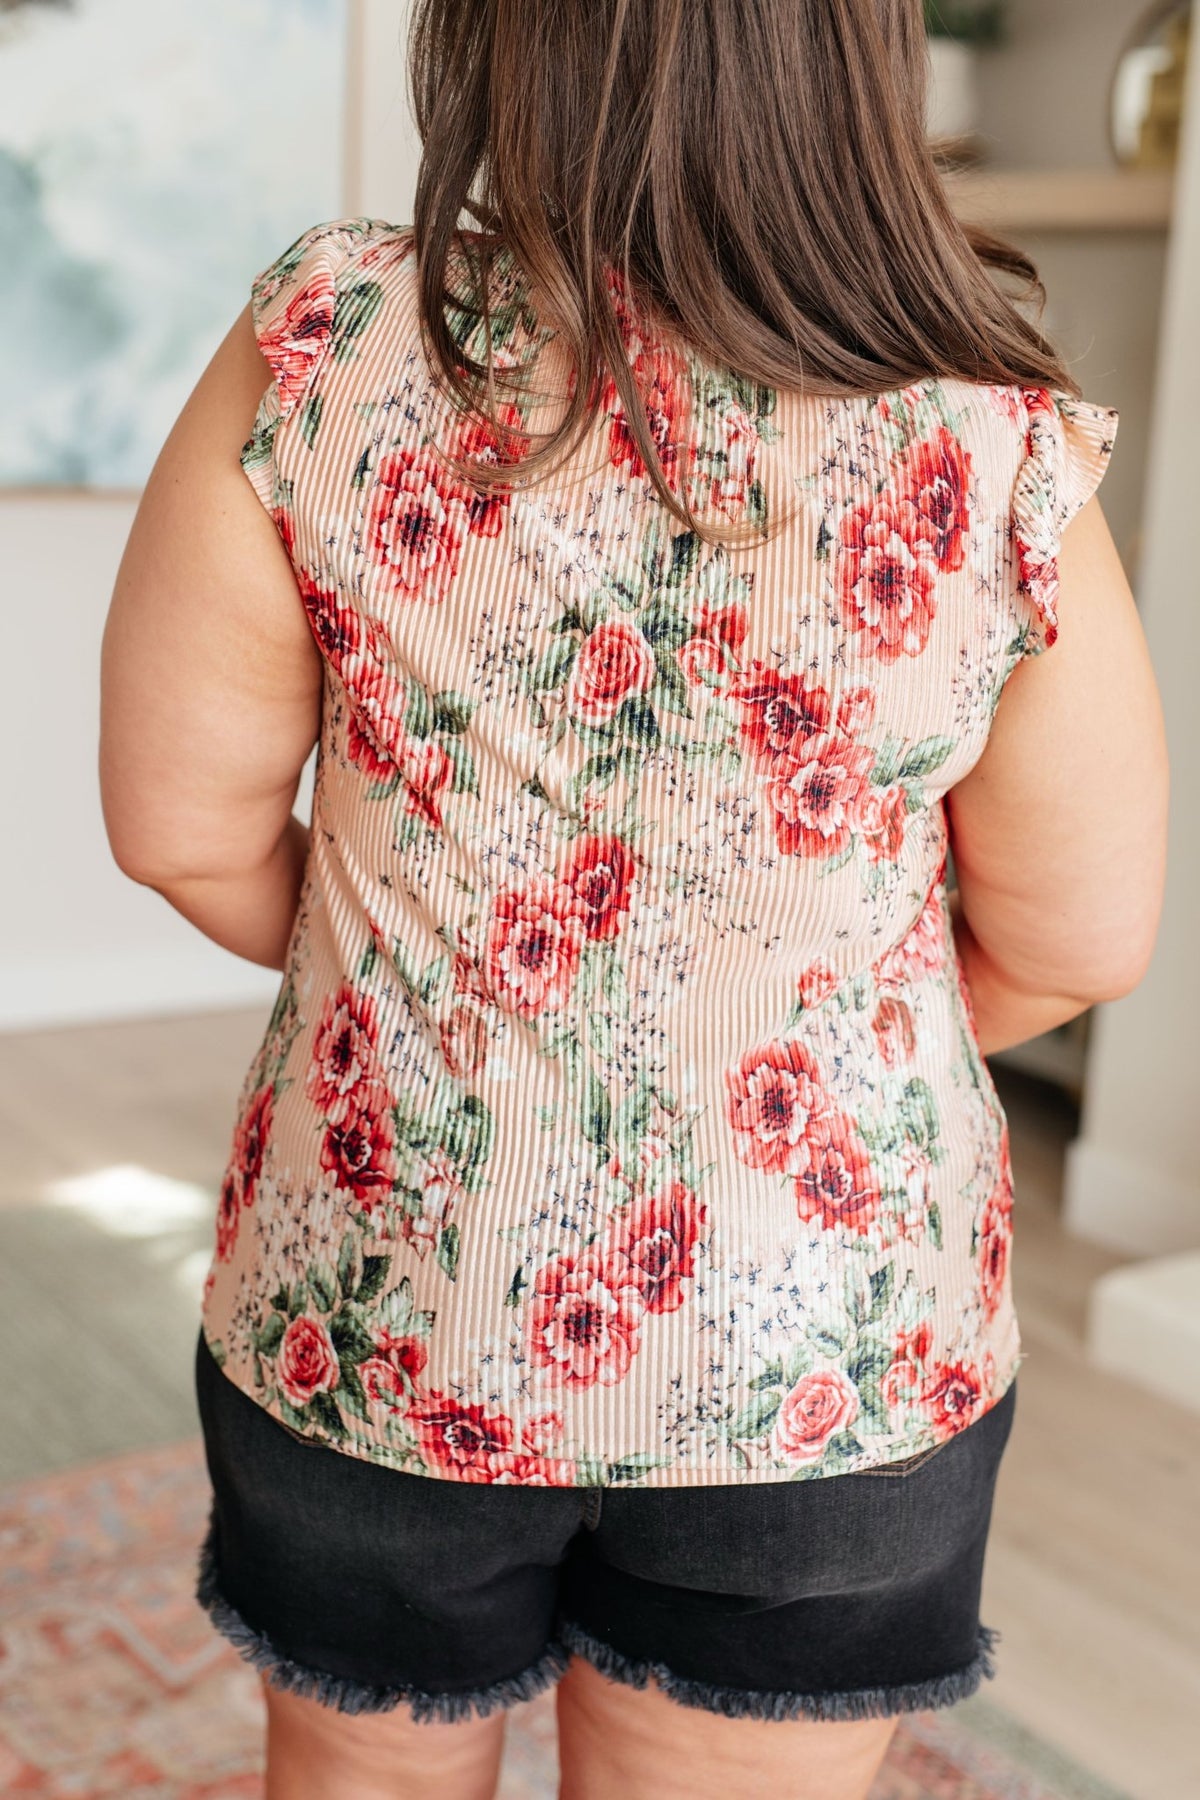 Making Me Blush Floral Top - Happily Ever Atchison Shop Co.